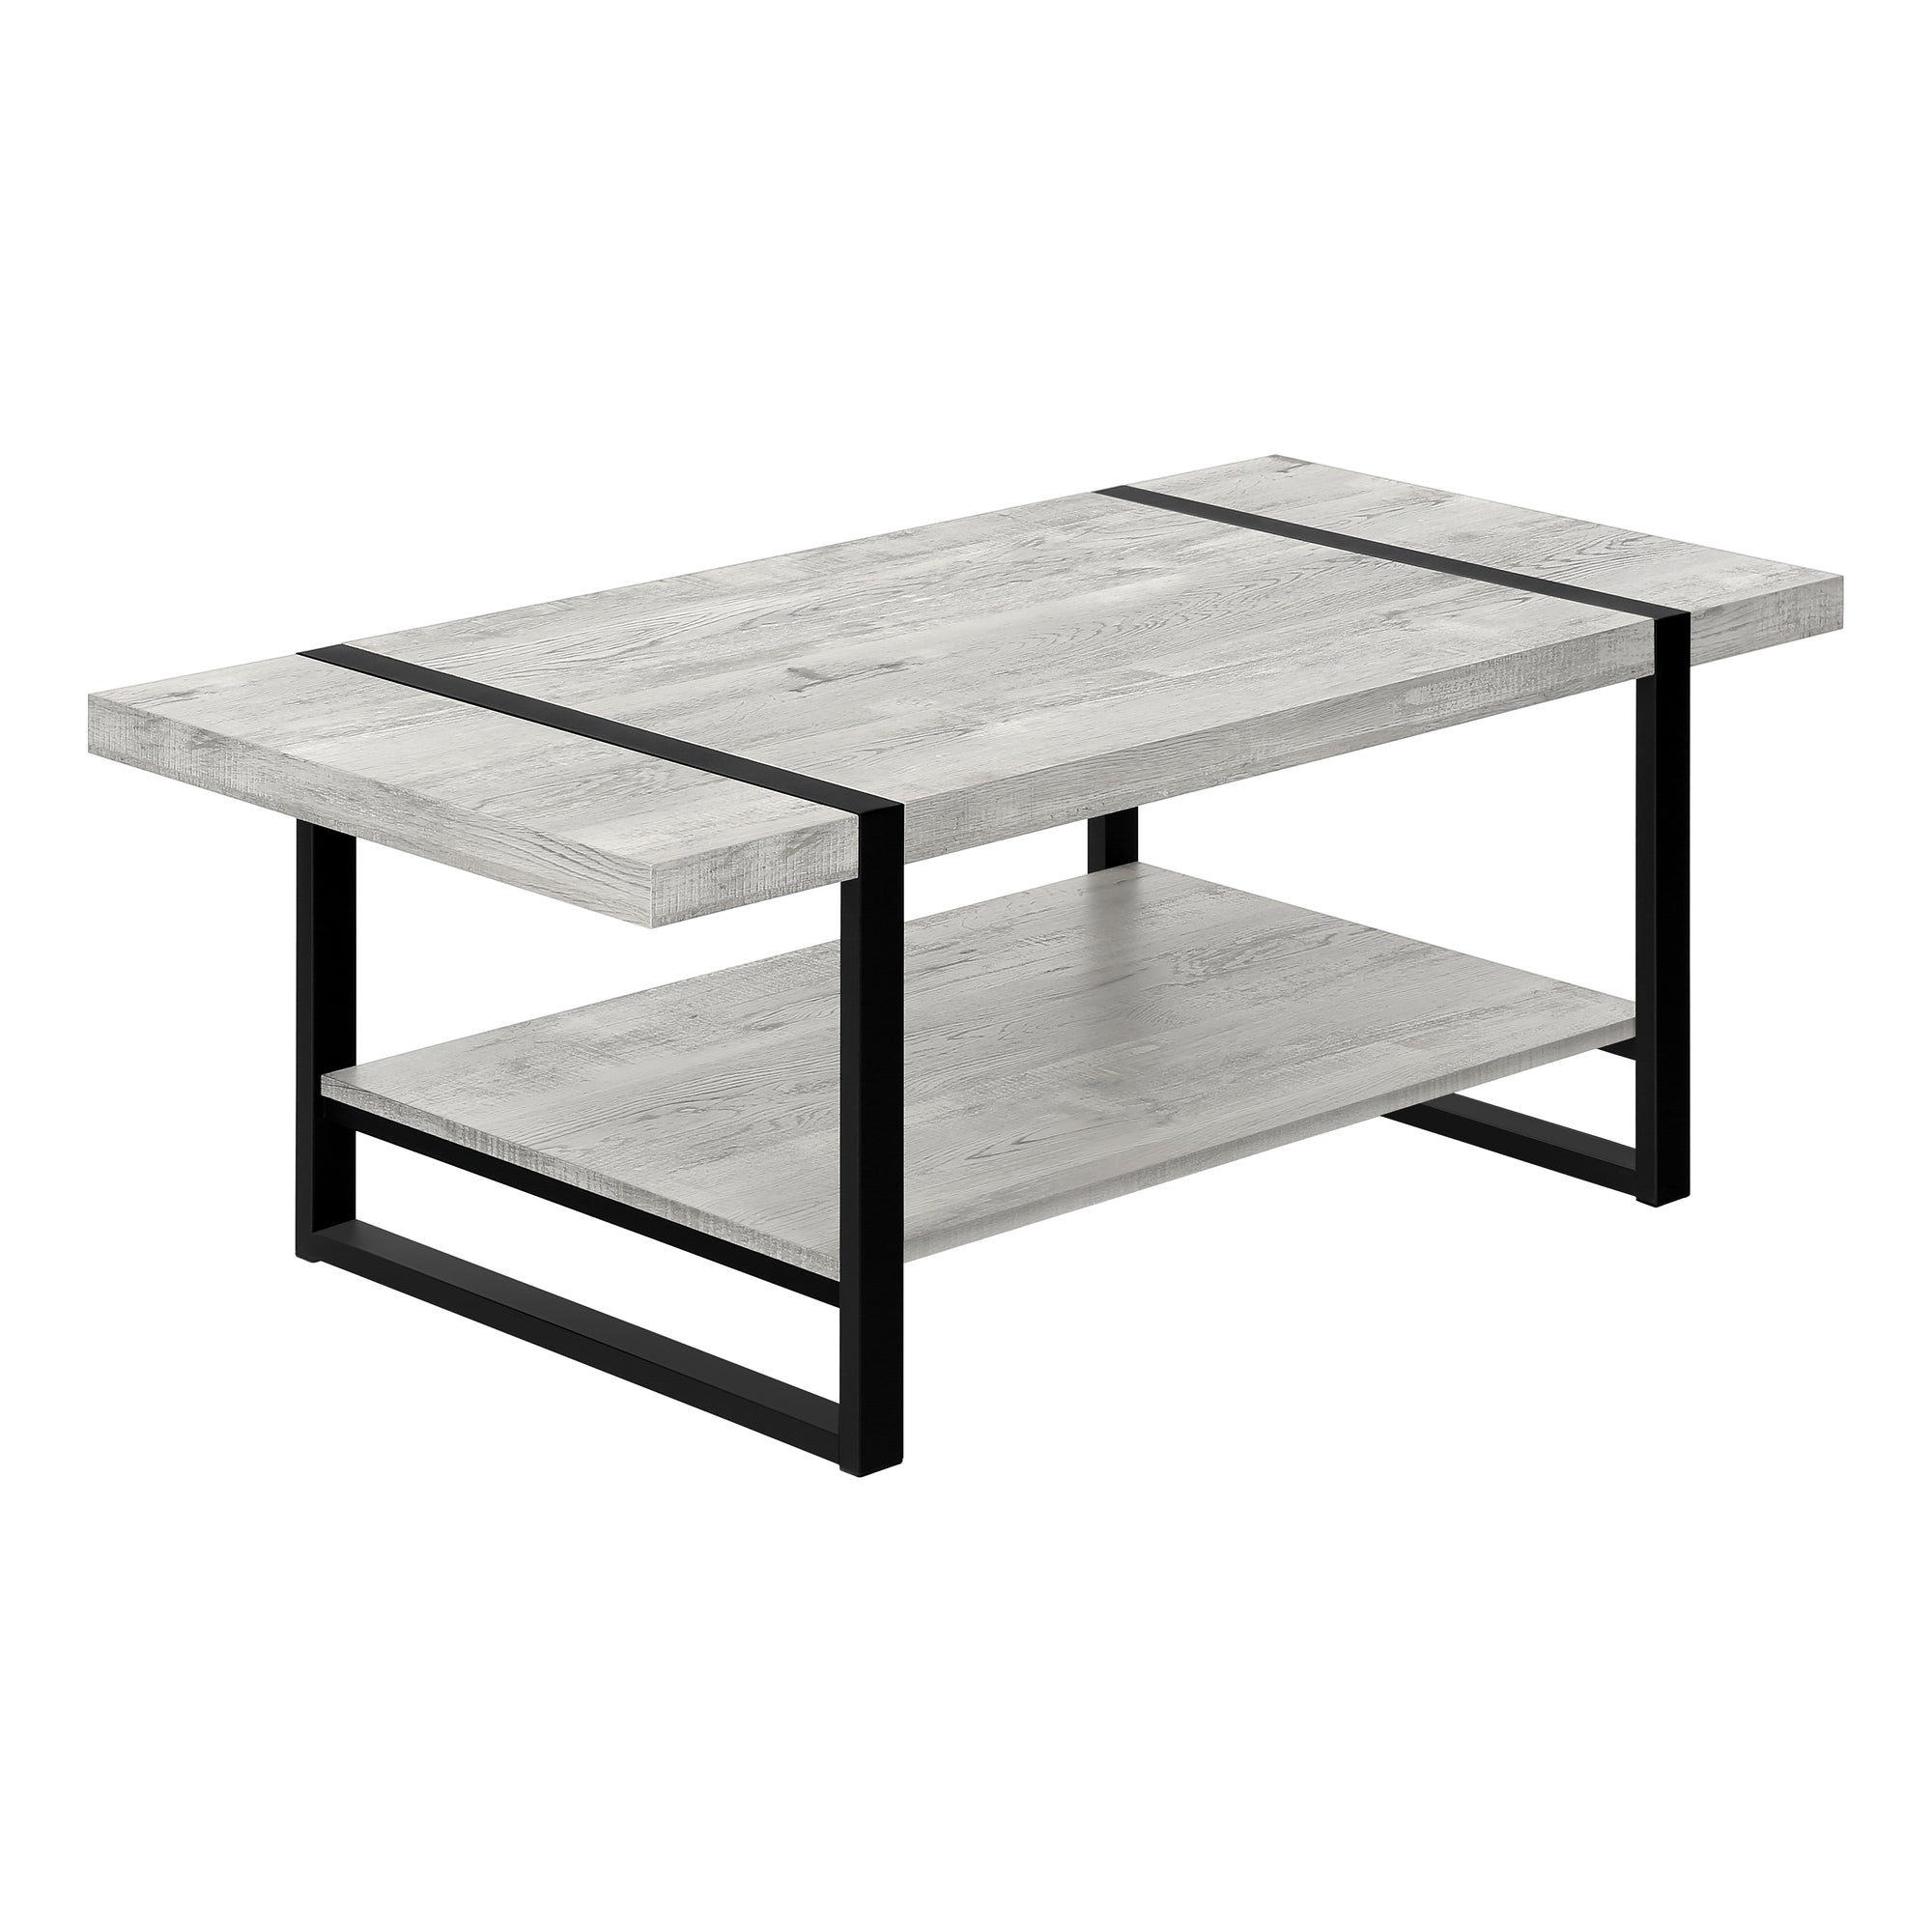 MN-592855    Coffee Table, Accent, Cocktail, Rectangular, Living Room, Metal Frame, Laminate, Grey Reclaimed Wood Look, Black, Contemporary, Industrial, Modern